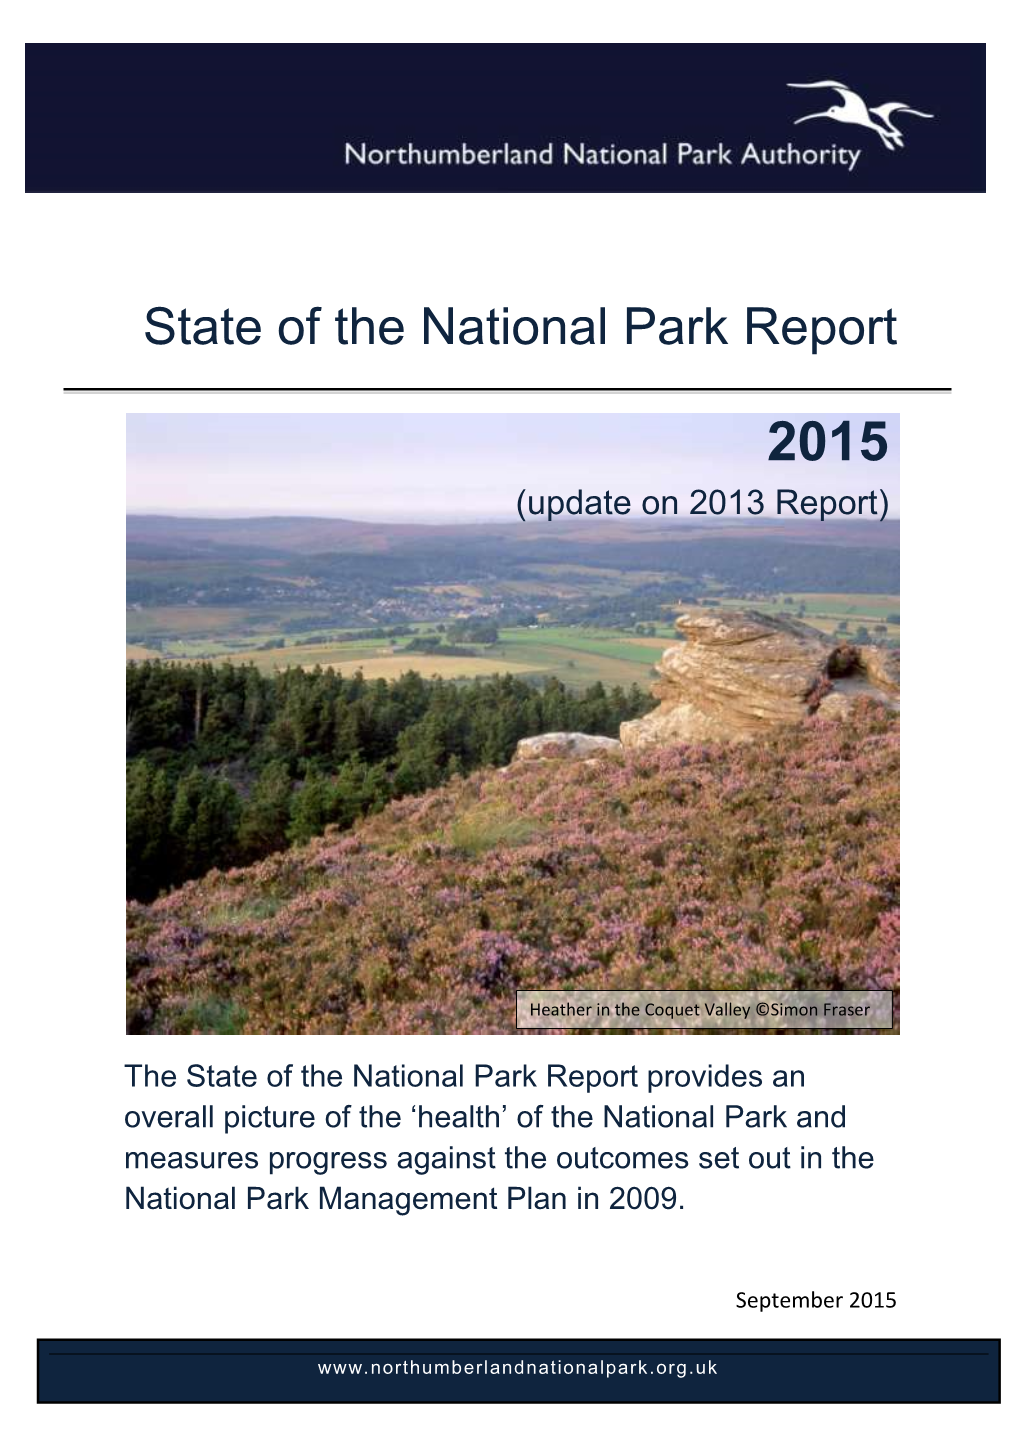 State of the National Park Report 2015